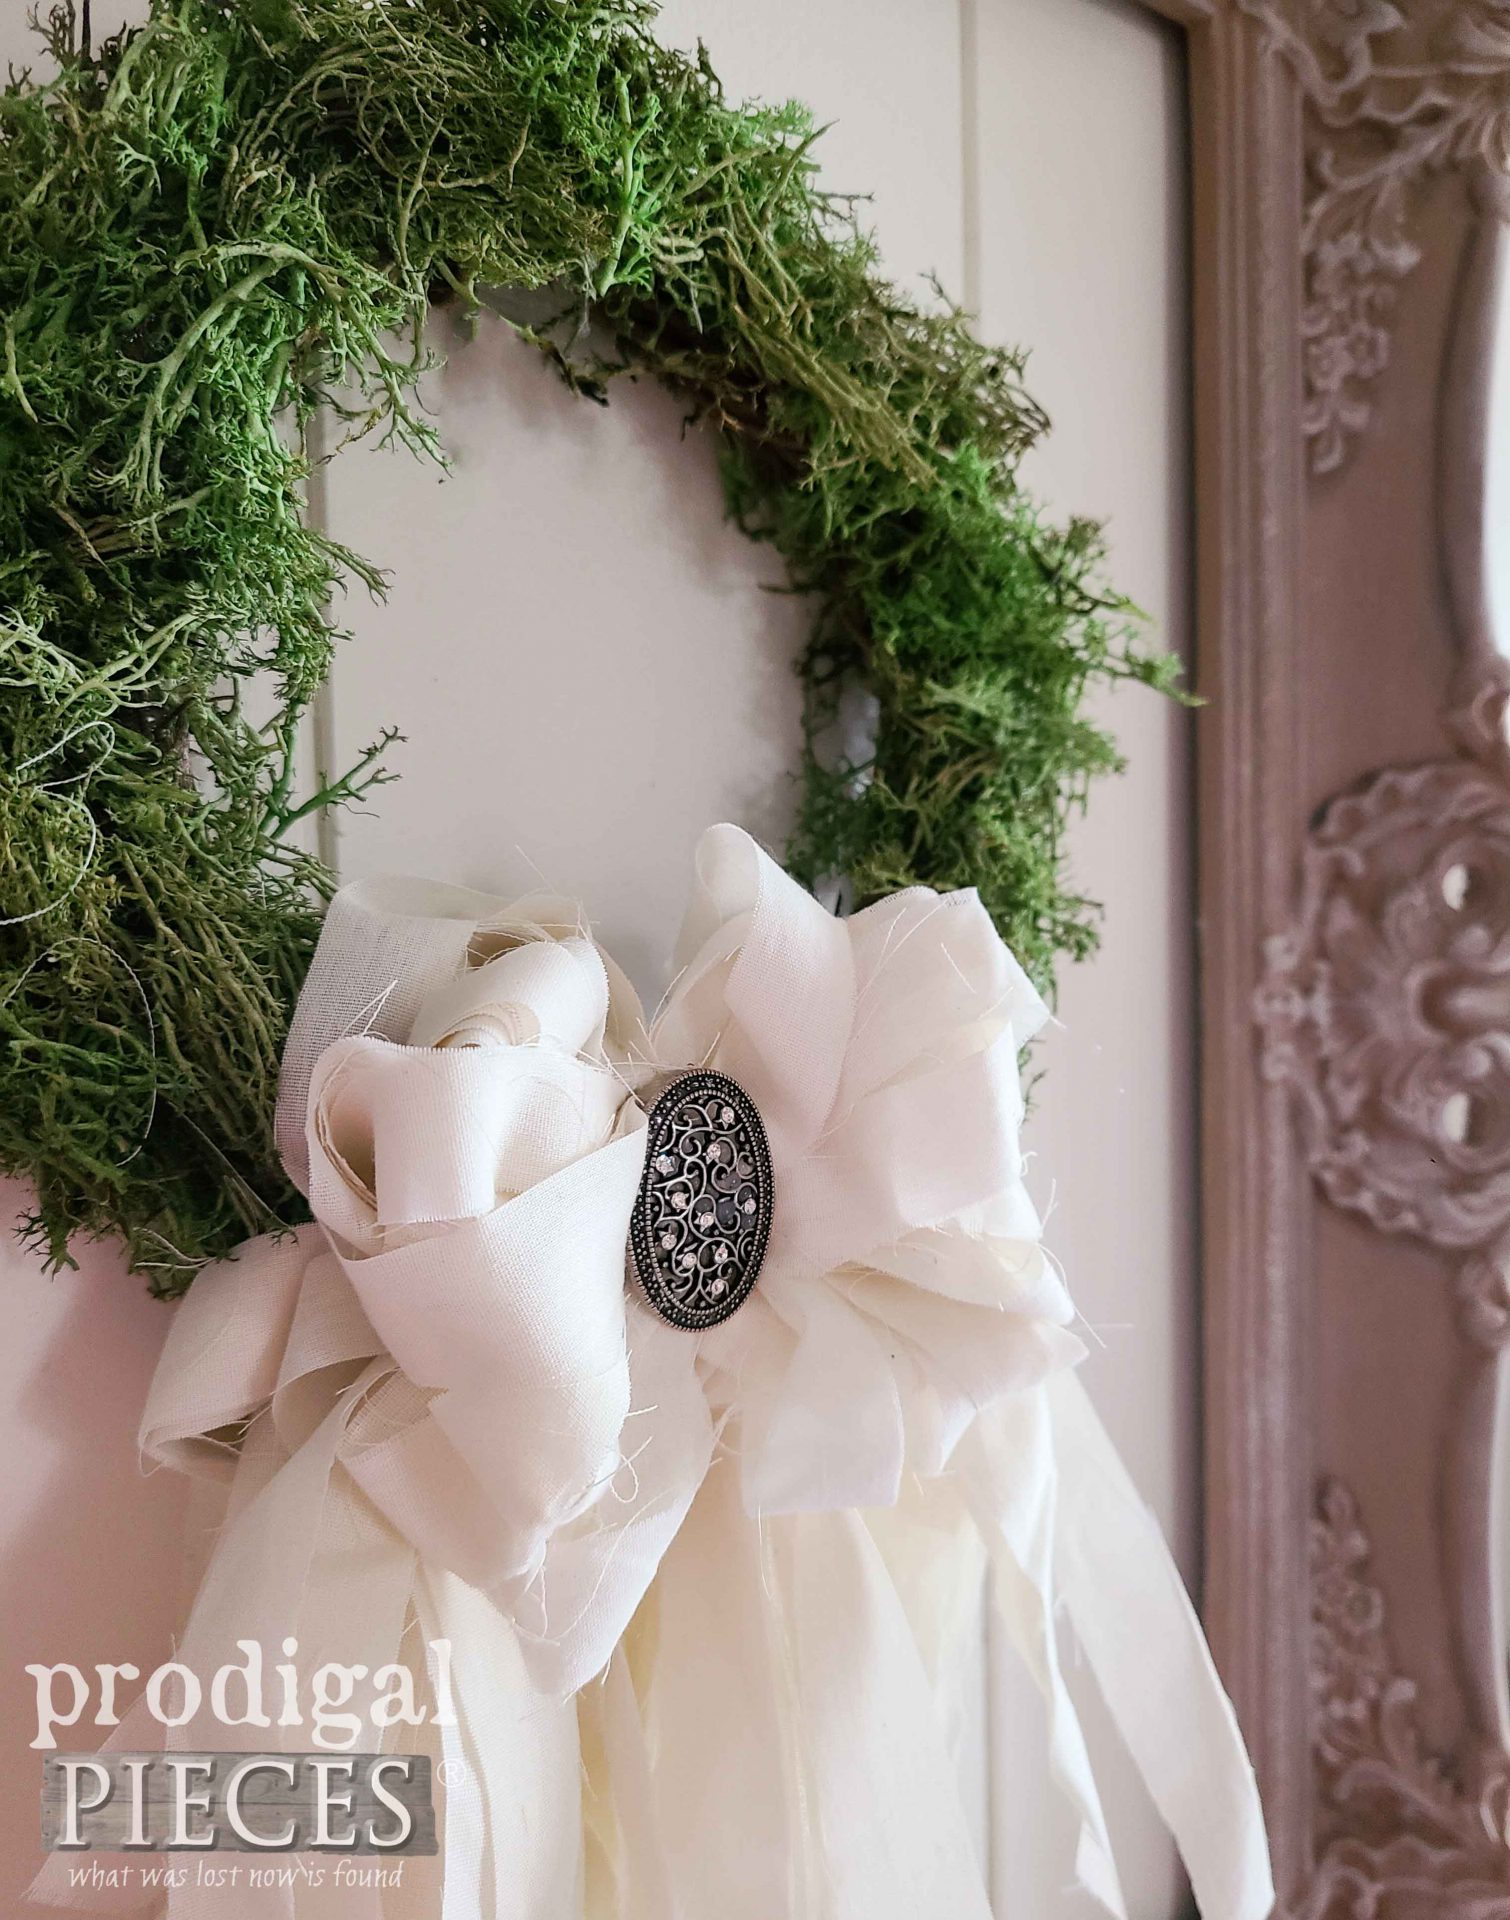 Fabric Strip Bow with Vintage Brooch by Larissa of Prodigal Pieces | prodigalpieces.com #prodigalpieces #diy #vintage #handmade